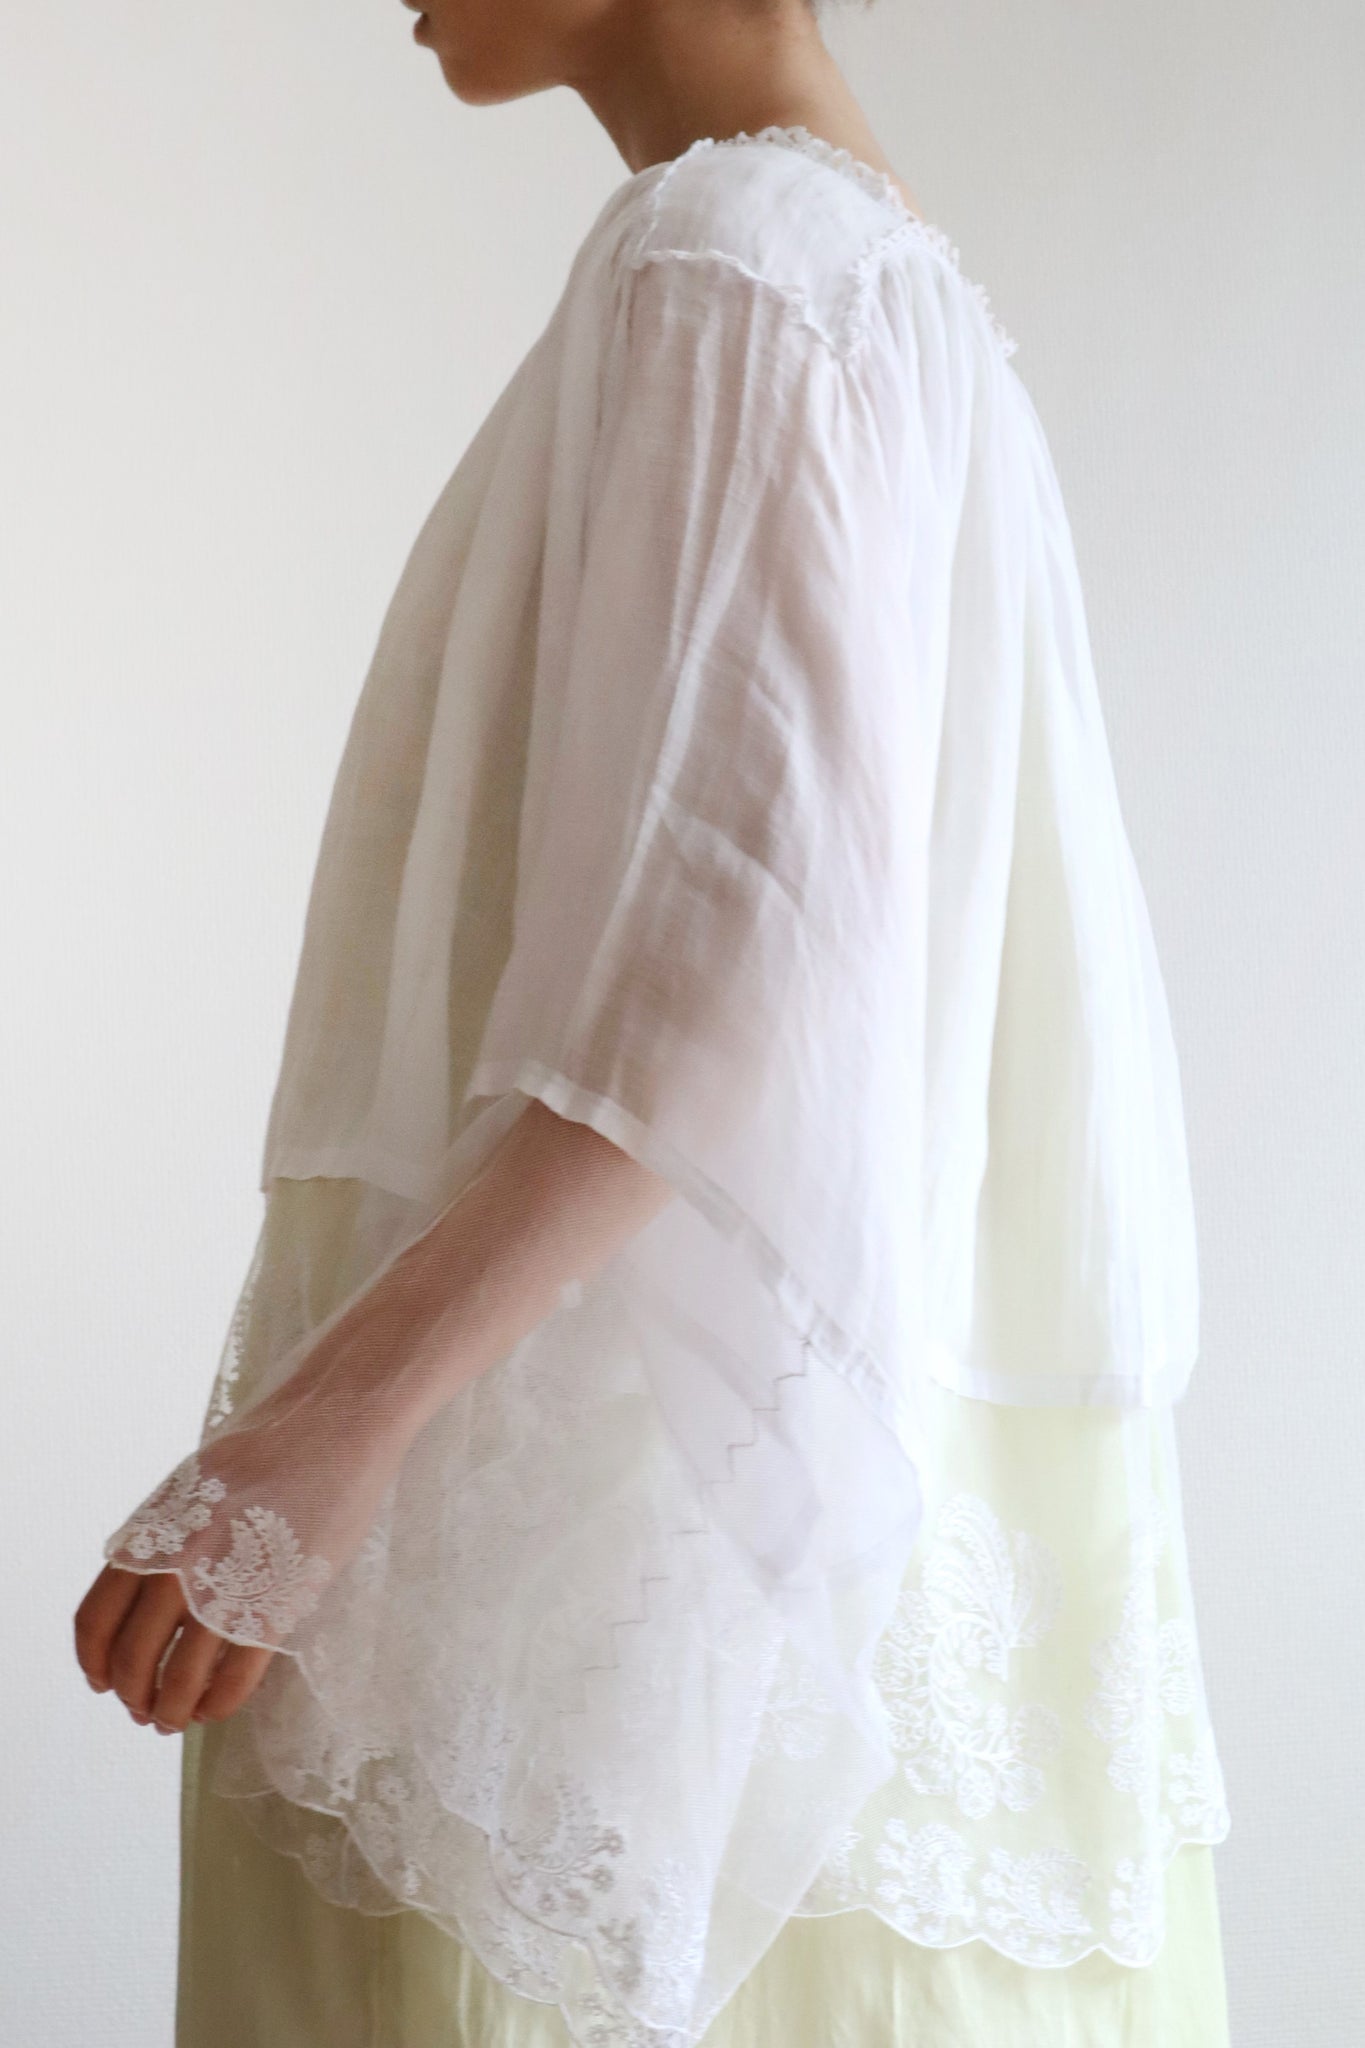 1900s Floral Lace Cotton Church Smock